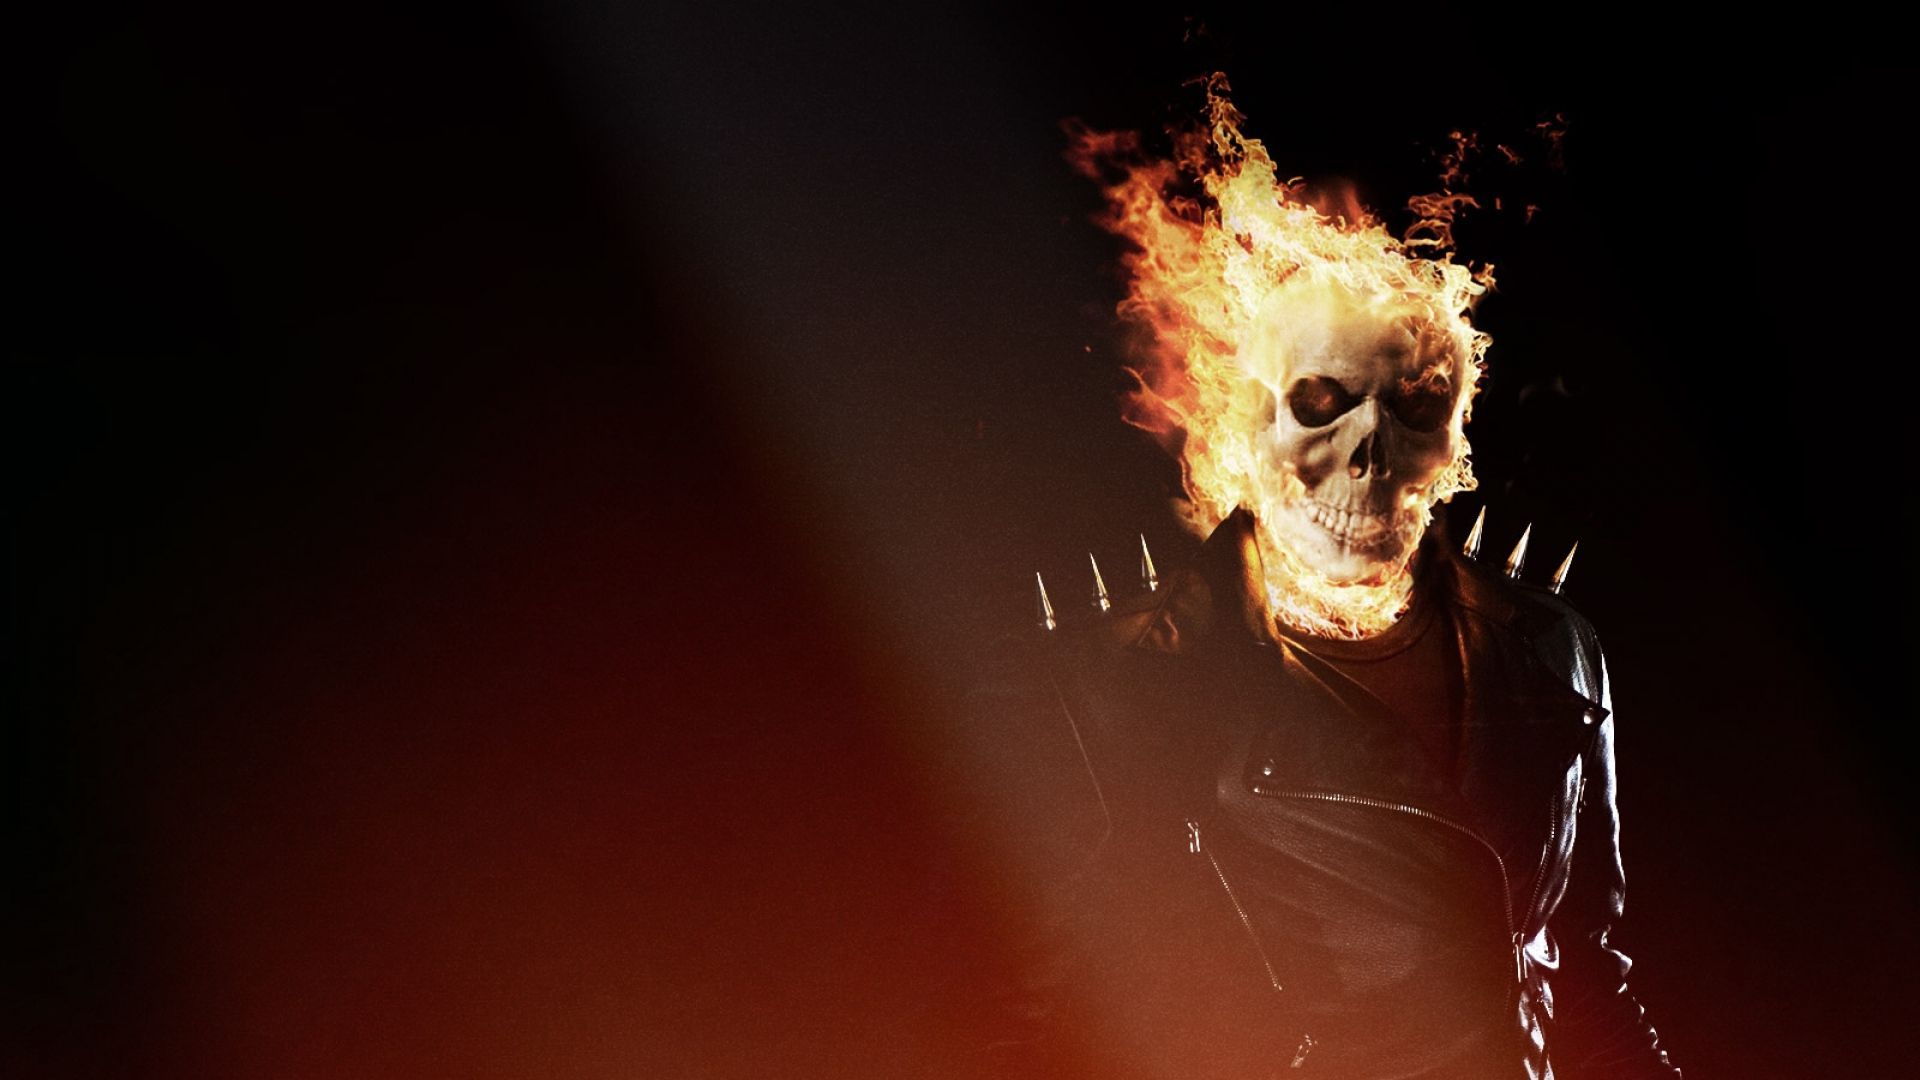 Download Wallpaper 1920x1080 Ghost rider, Skull, Fire, Flame Full ...